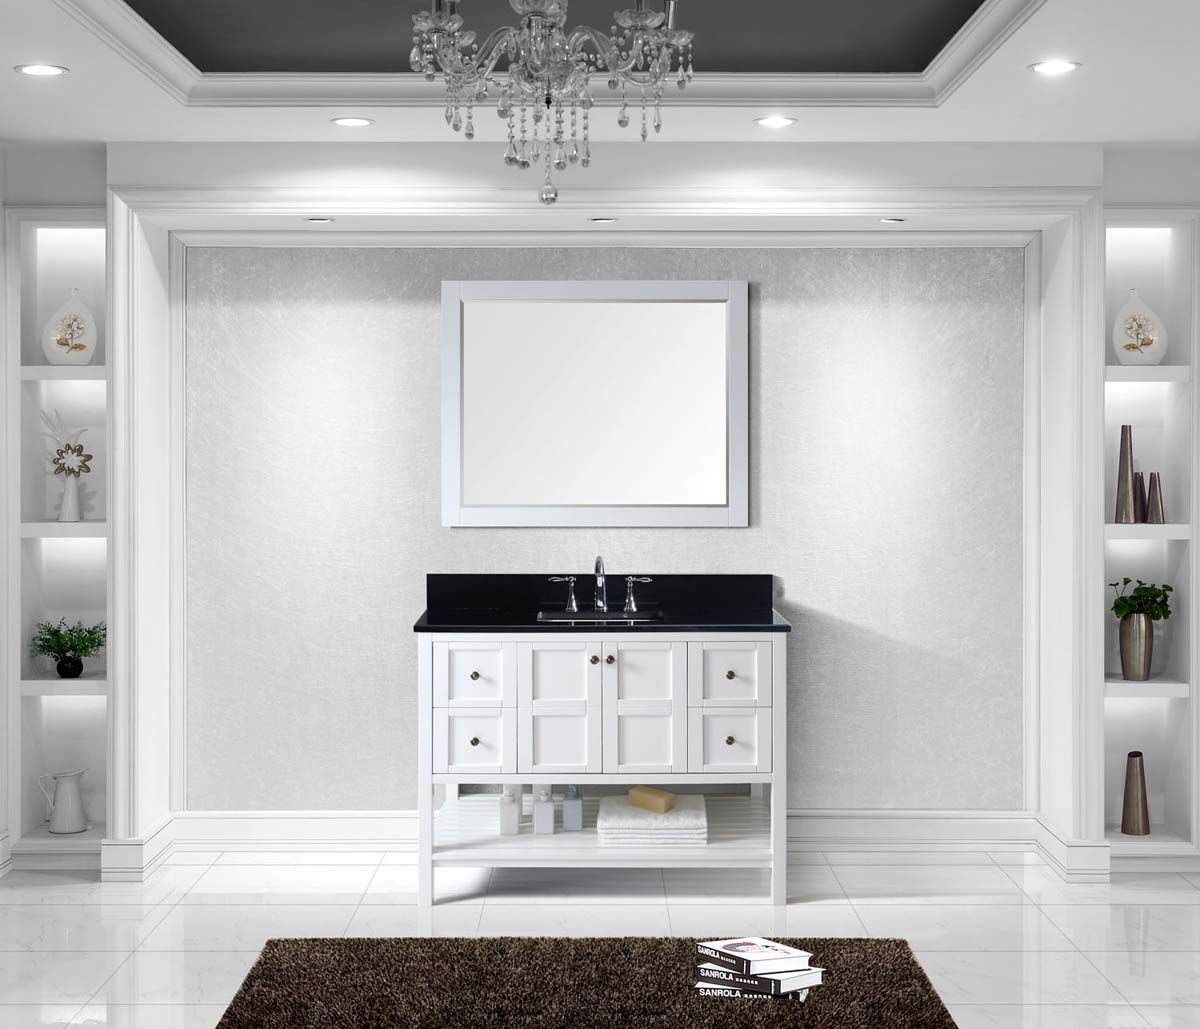 A beautiful transitional white vanity with a striking black top